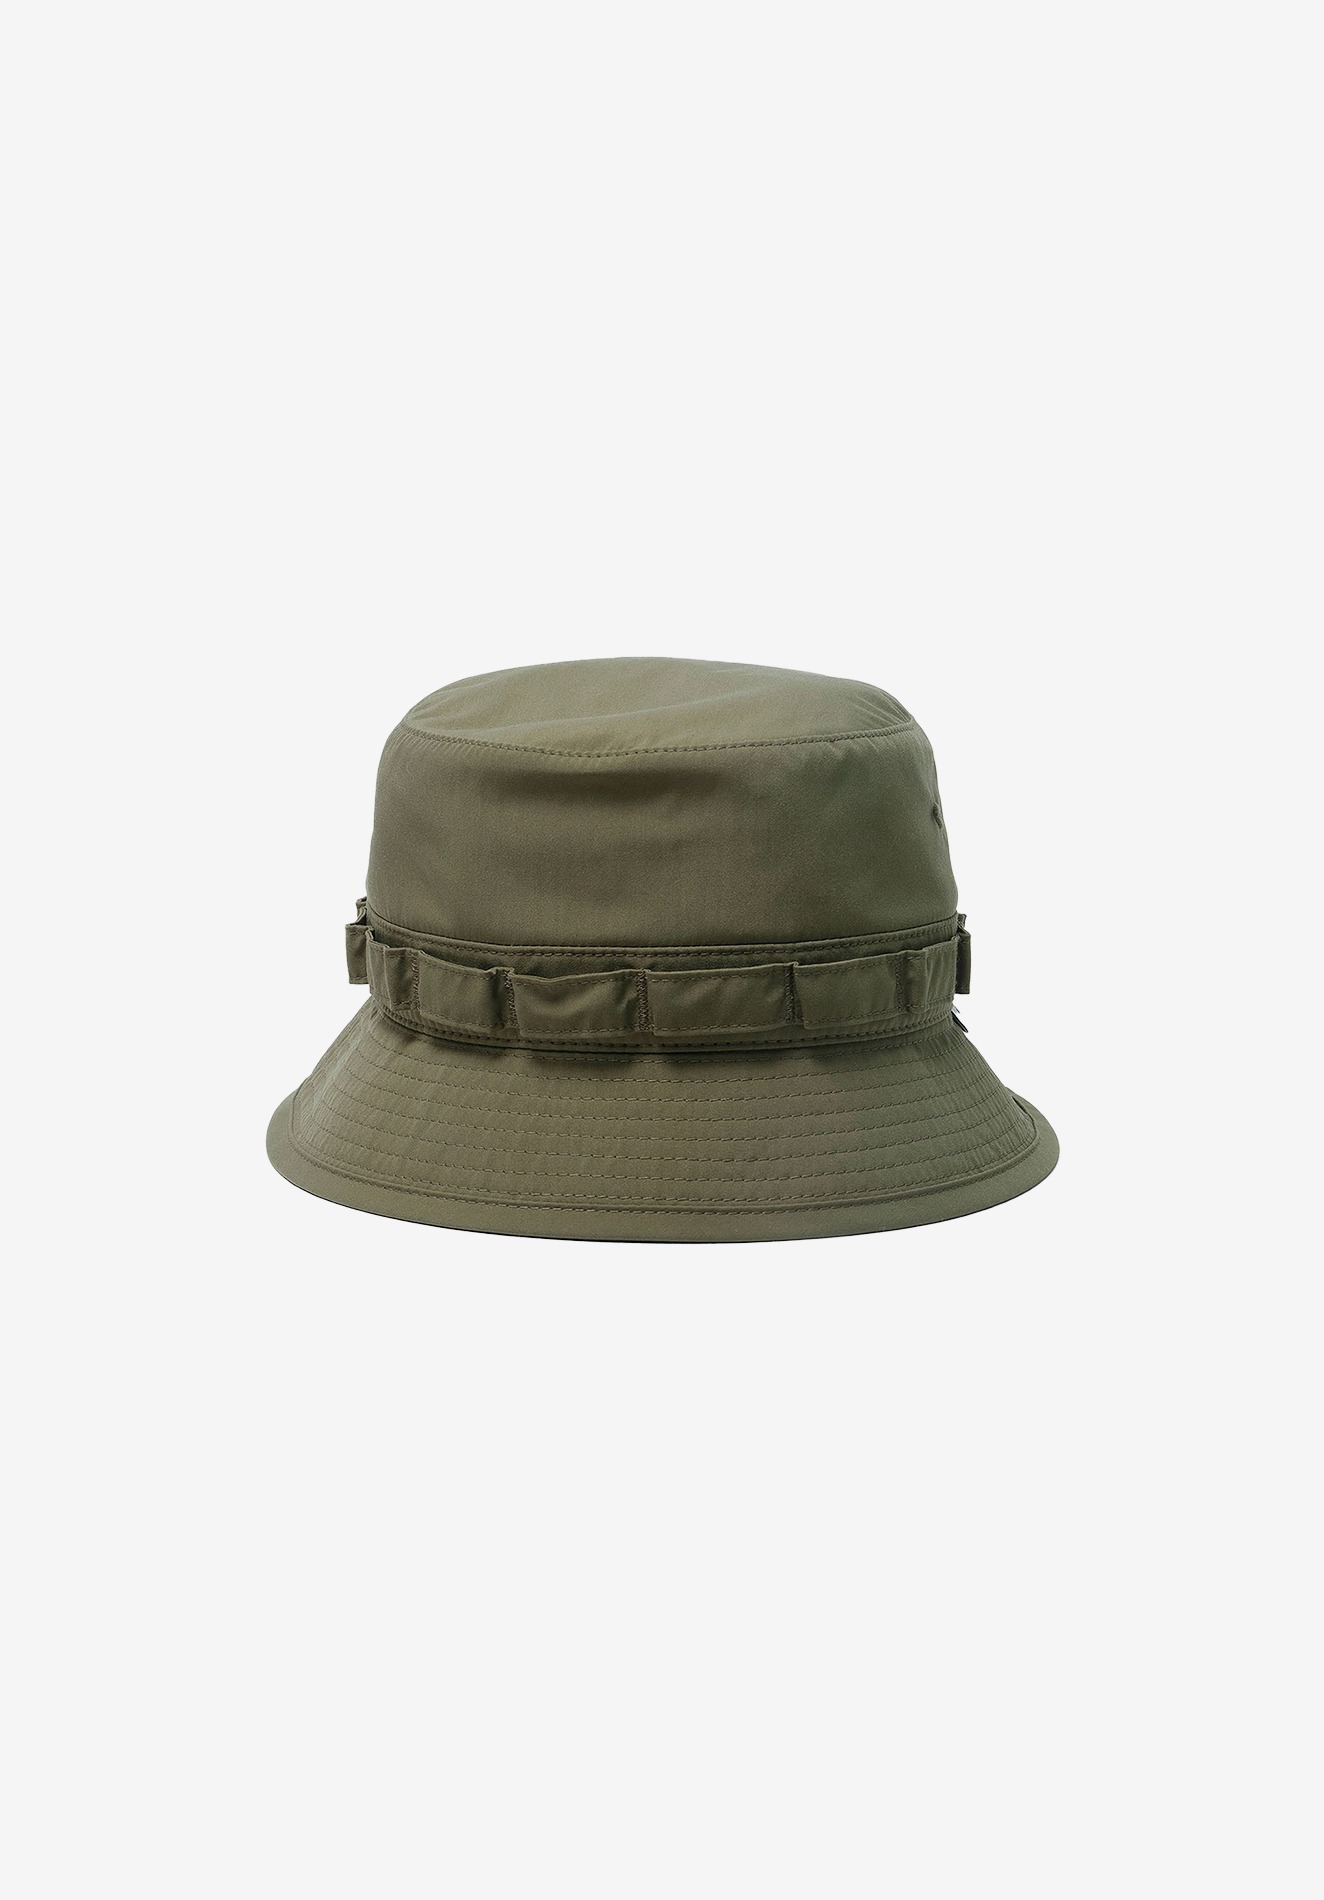 JUNGLE 02 / HAT / POLY. WEATHER. FORTLESS, OLIVE DRAB